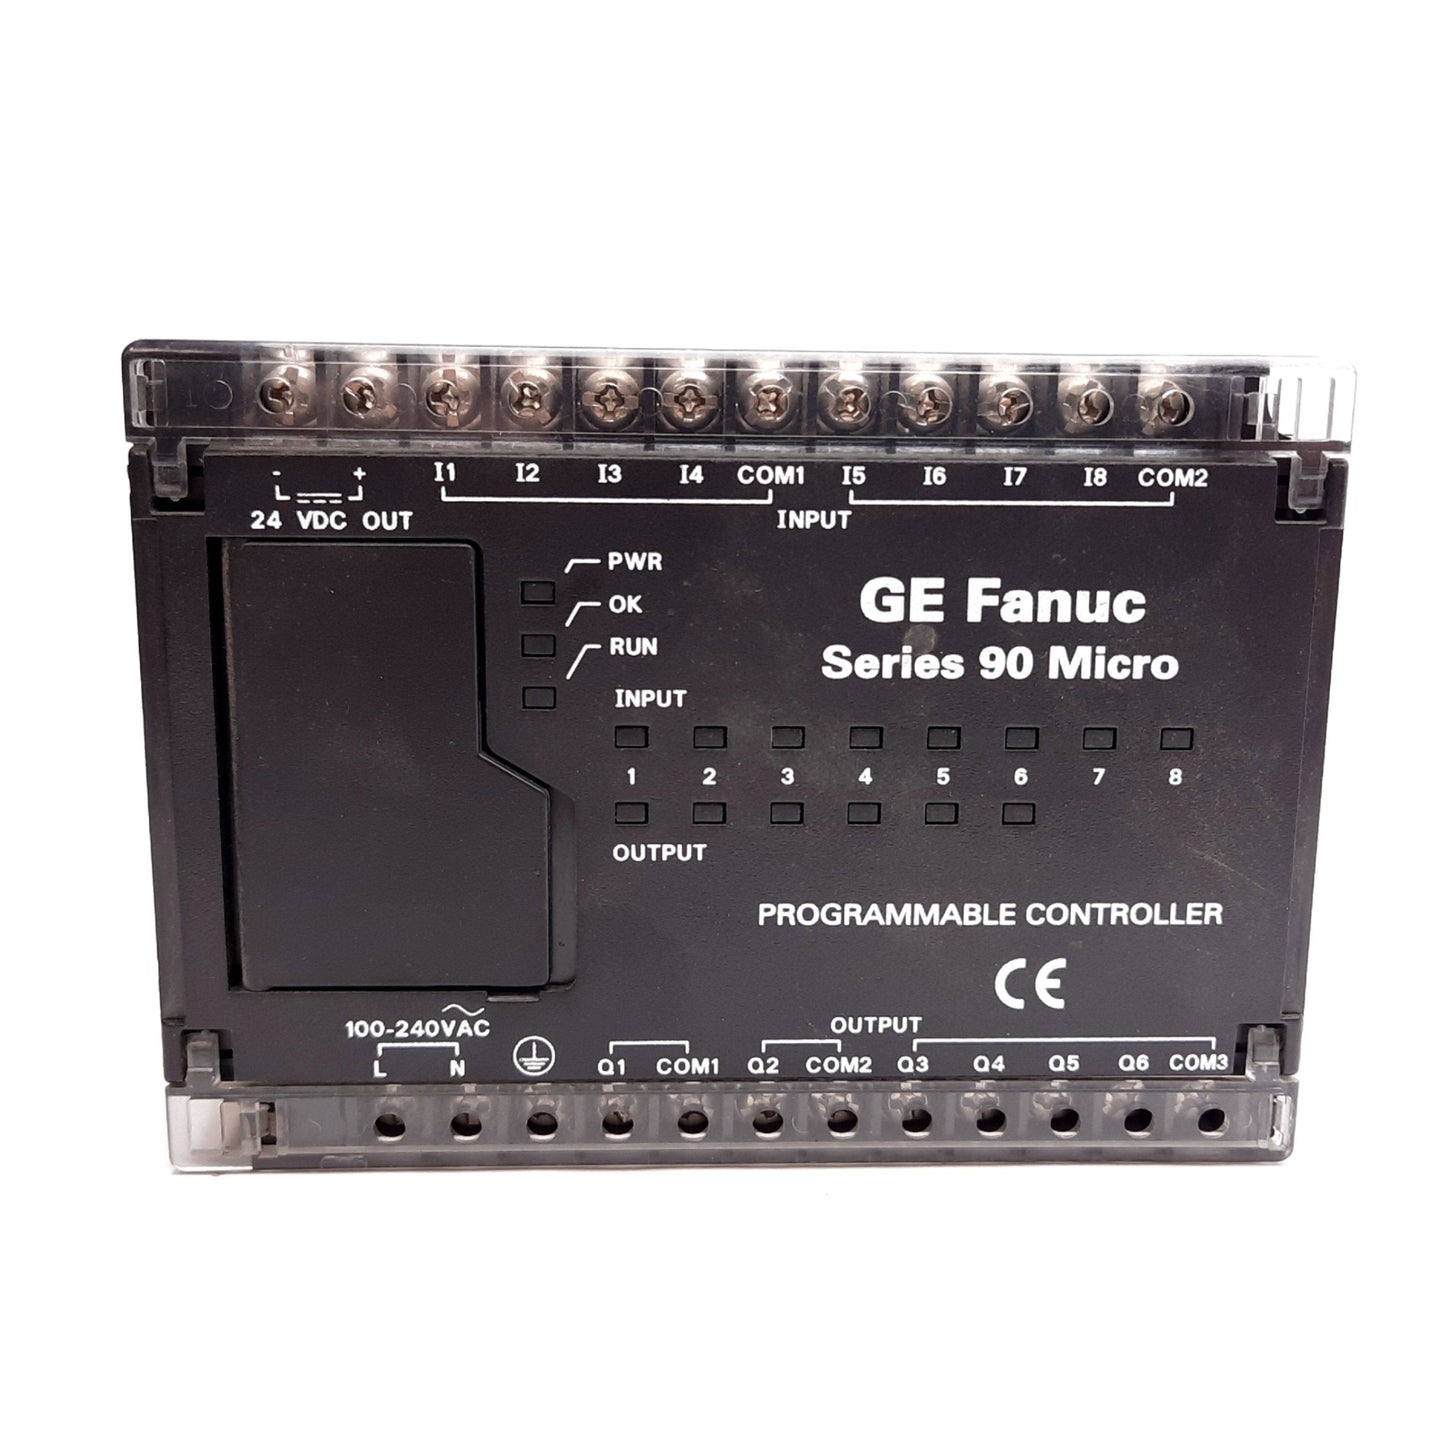 Used GE Fanuc IC693UDR001RP1 Series 90 Micro PLC I/O Unit, 8 IN/6 OUT, 100-240VAC